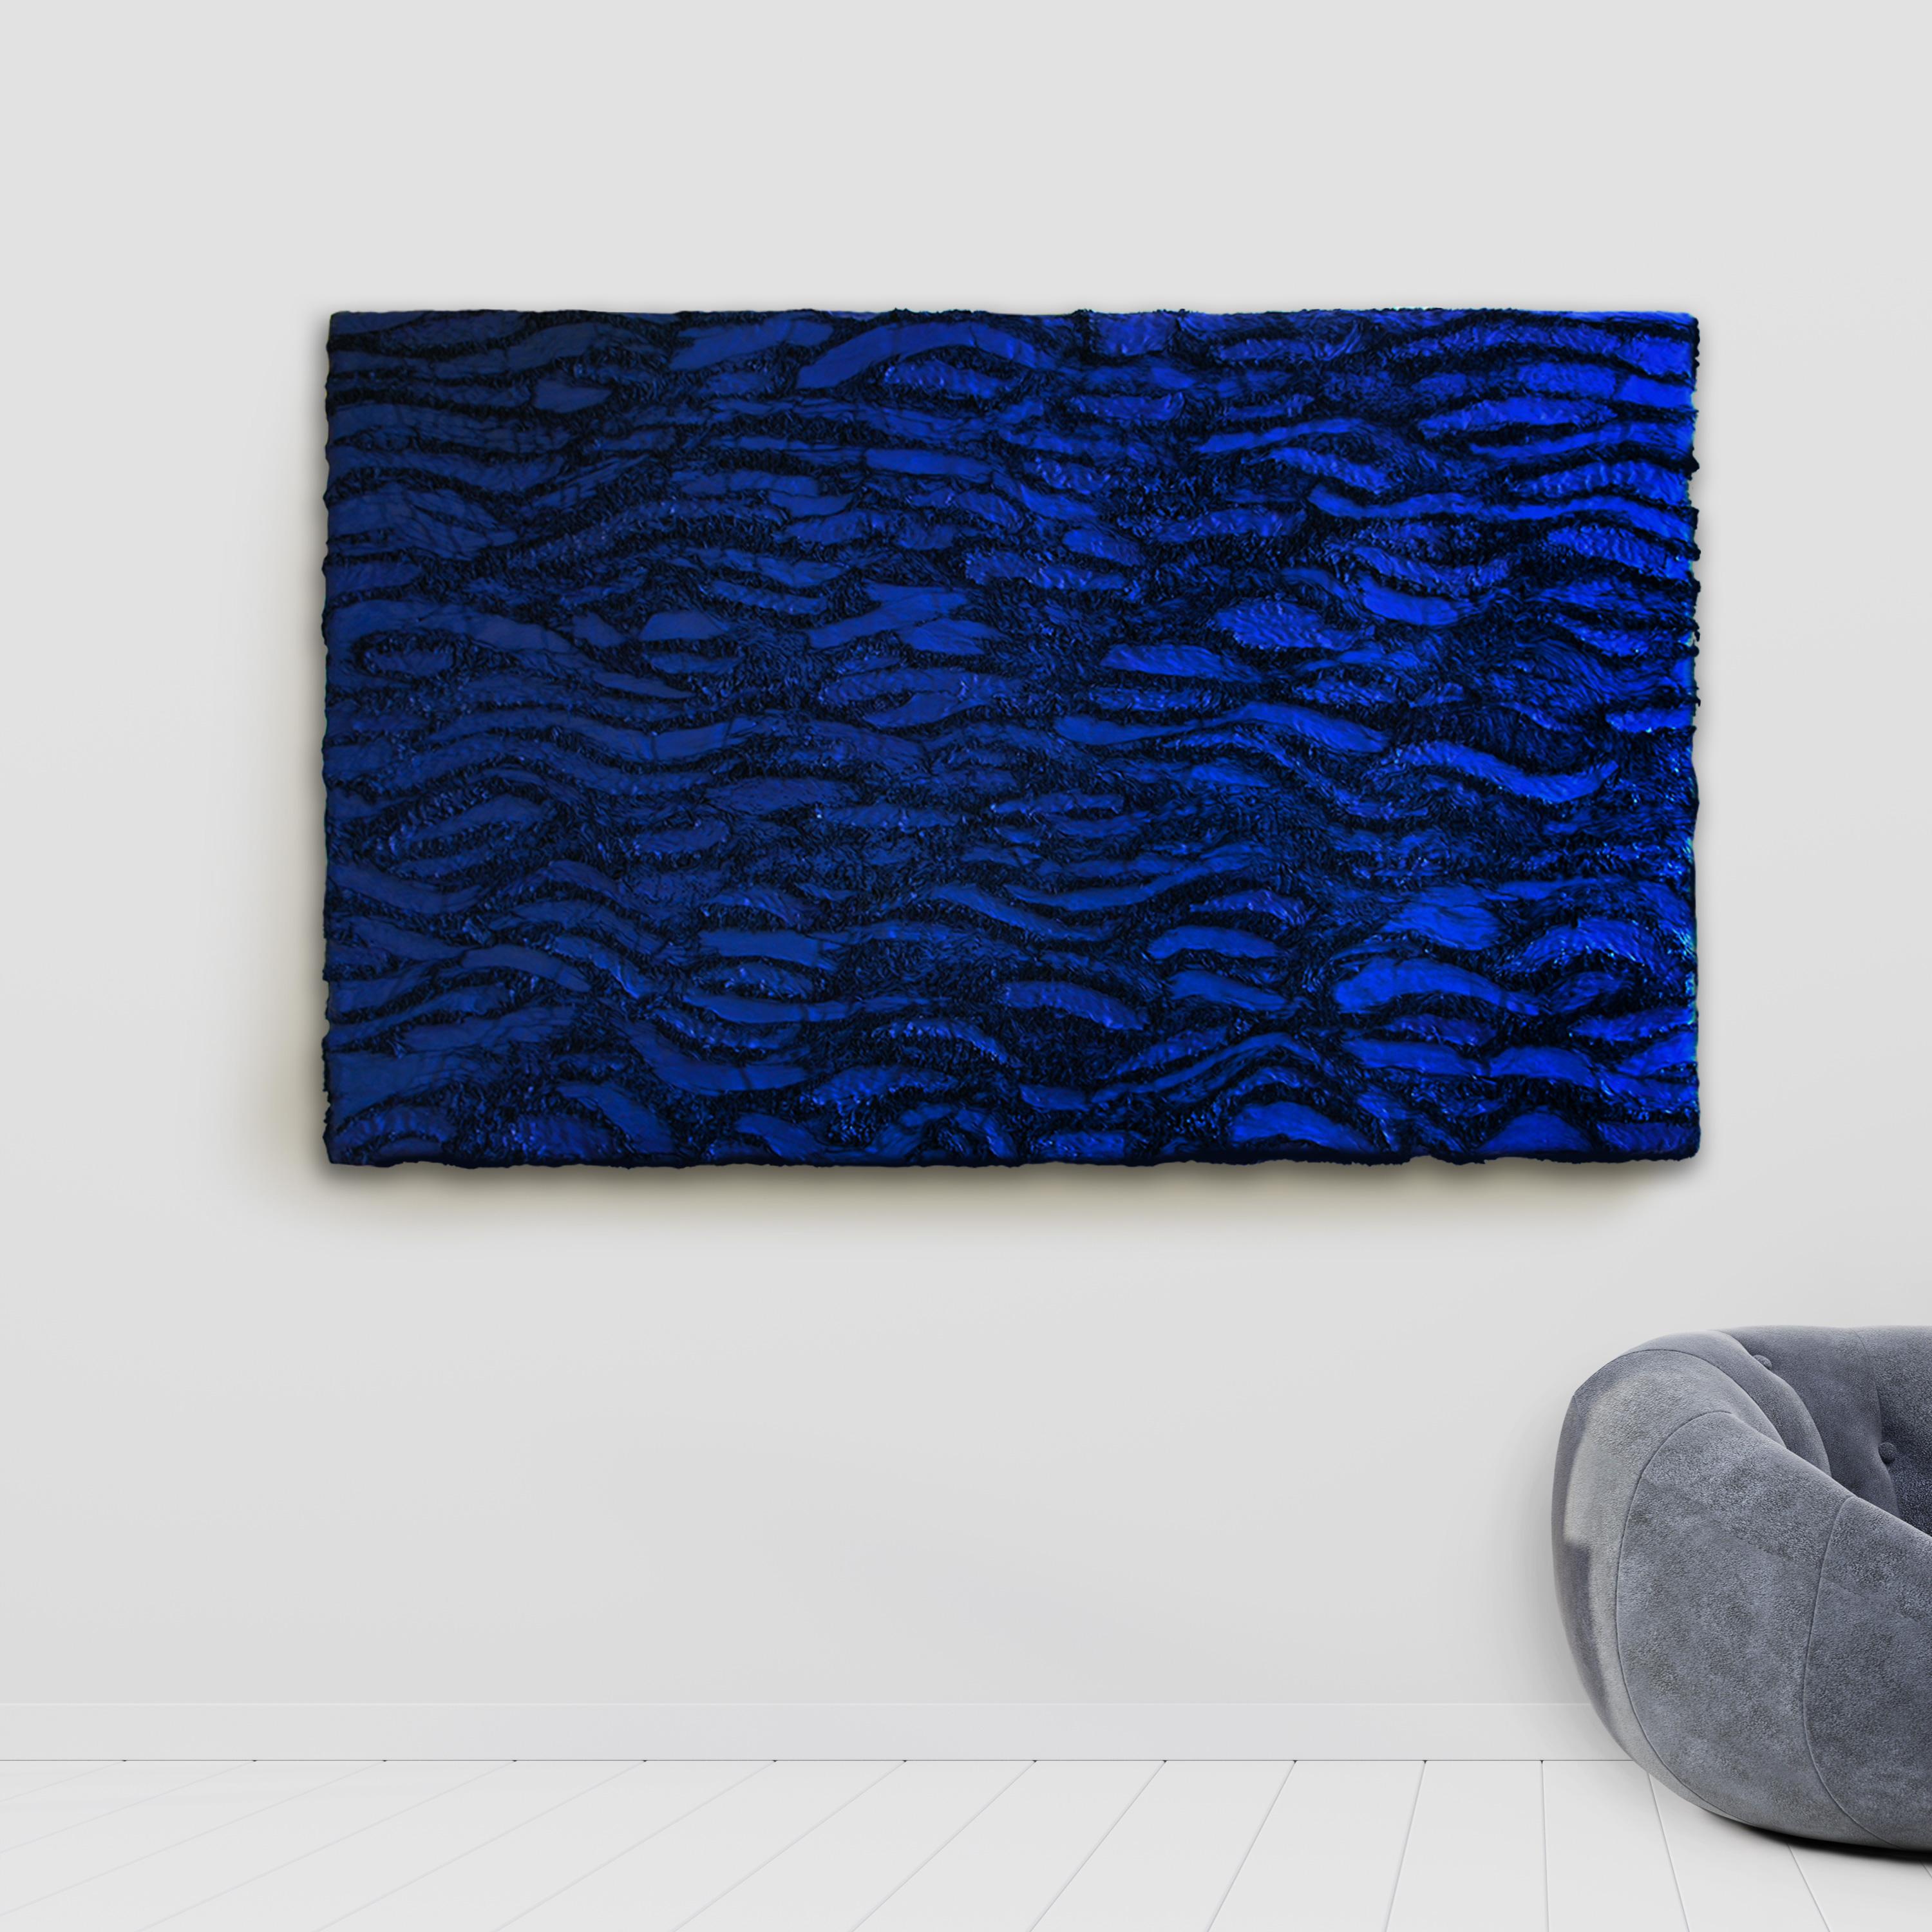 'Deep Blue Sea' Monochrome, Oil on artificial fur 150x242cm 2016, 21st Century, Abstract Oil Painting in Blue.

Monochrome image of the sea... the waves of a deep blue sea, calmly set in motion by the wind, or is this the calm before the